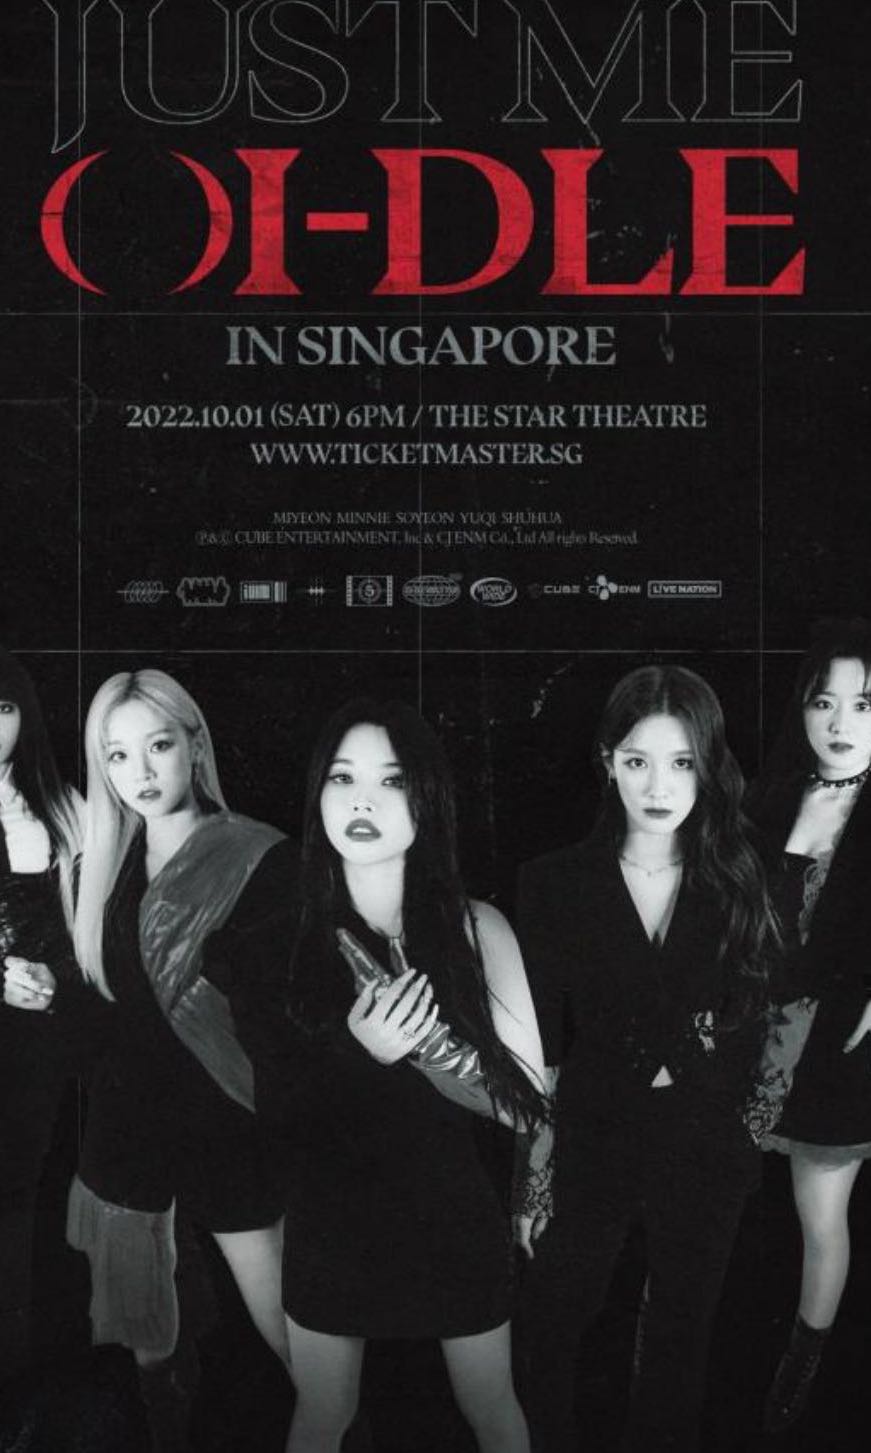 Gidle world tour, Tickets & Vouchers, Event Tickets on Carousell